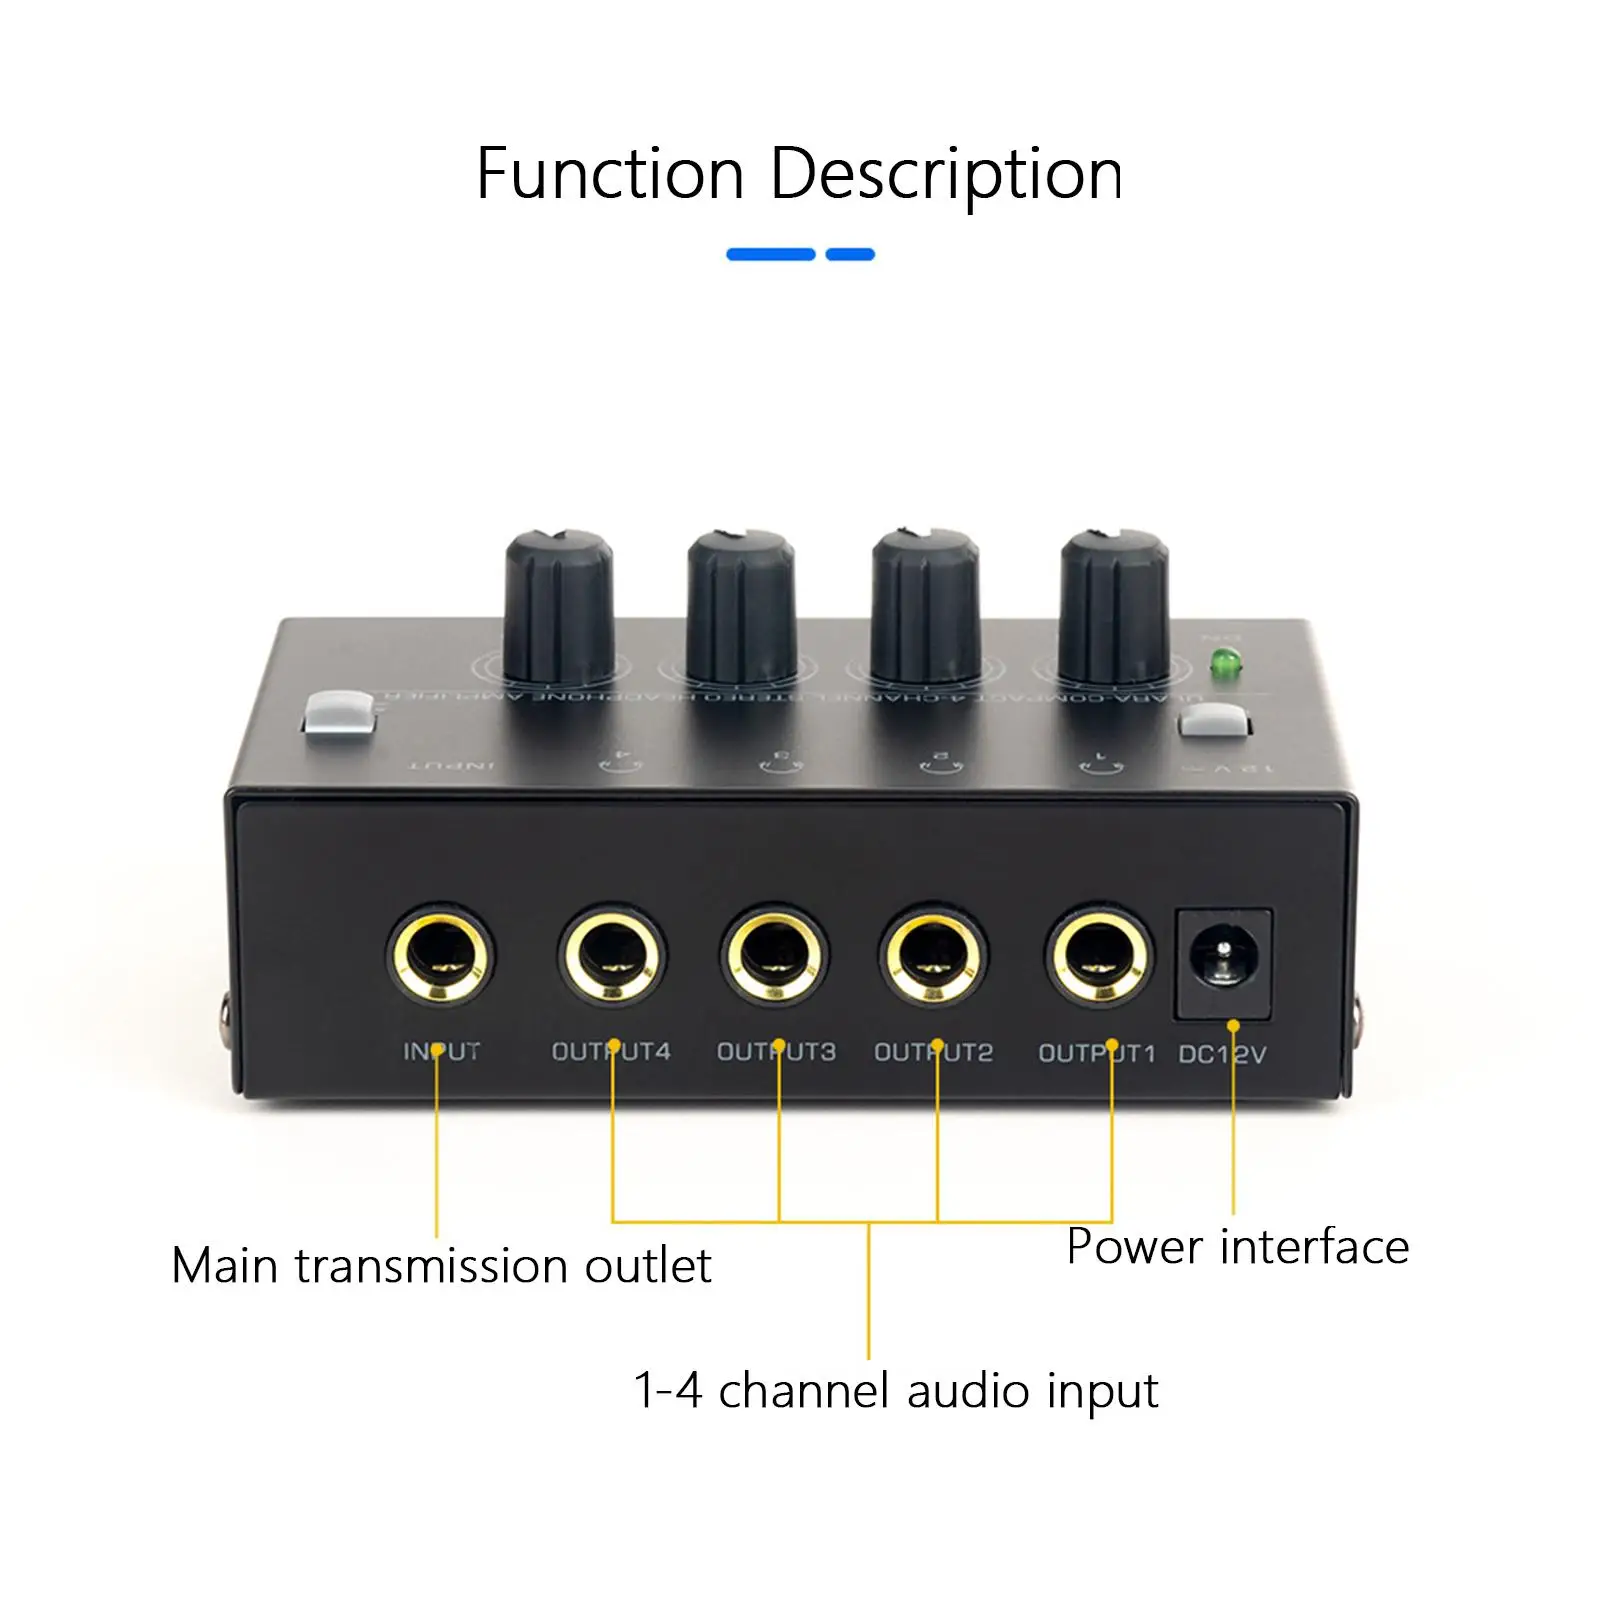 Compact Stereo Headphone Amplifier Stereo Audio Amplifier 4 Channels Low Noise Headphone Splitter Amplifier for Studio and Stage